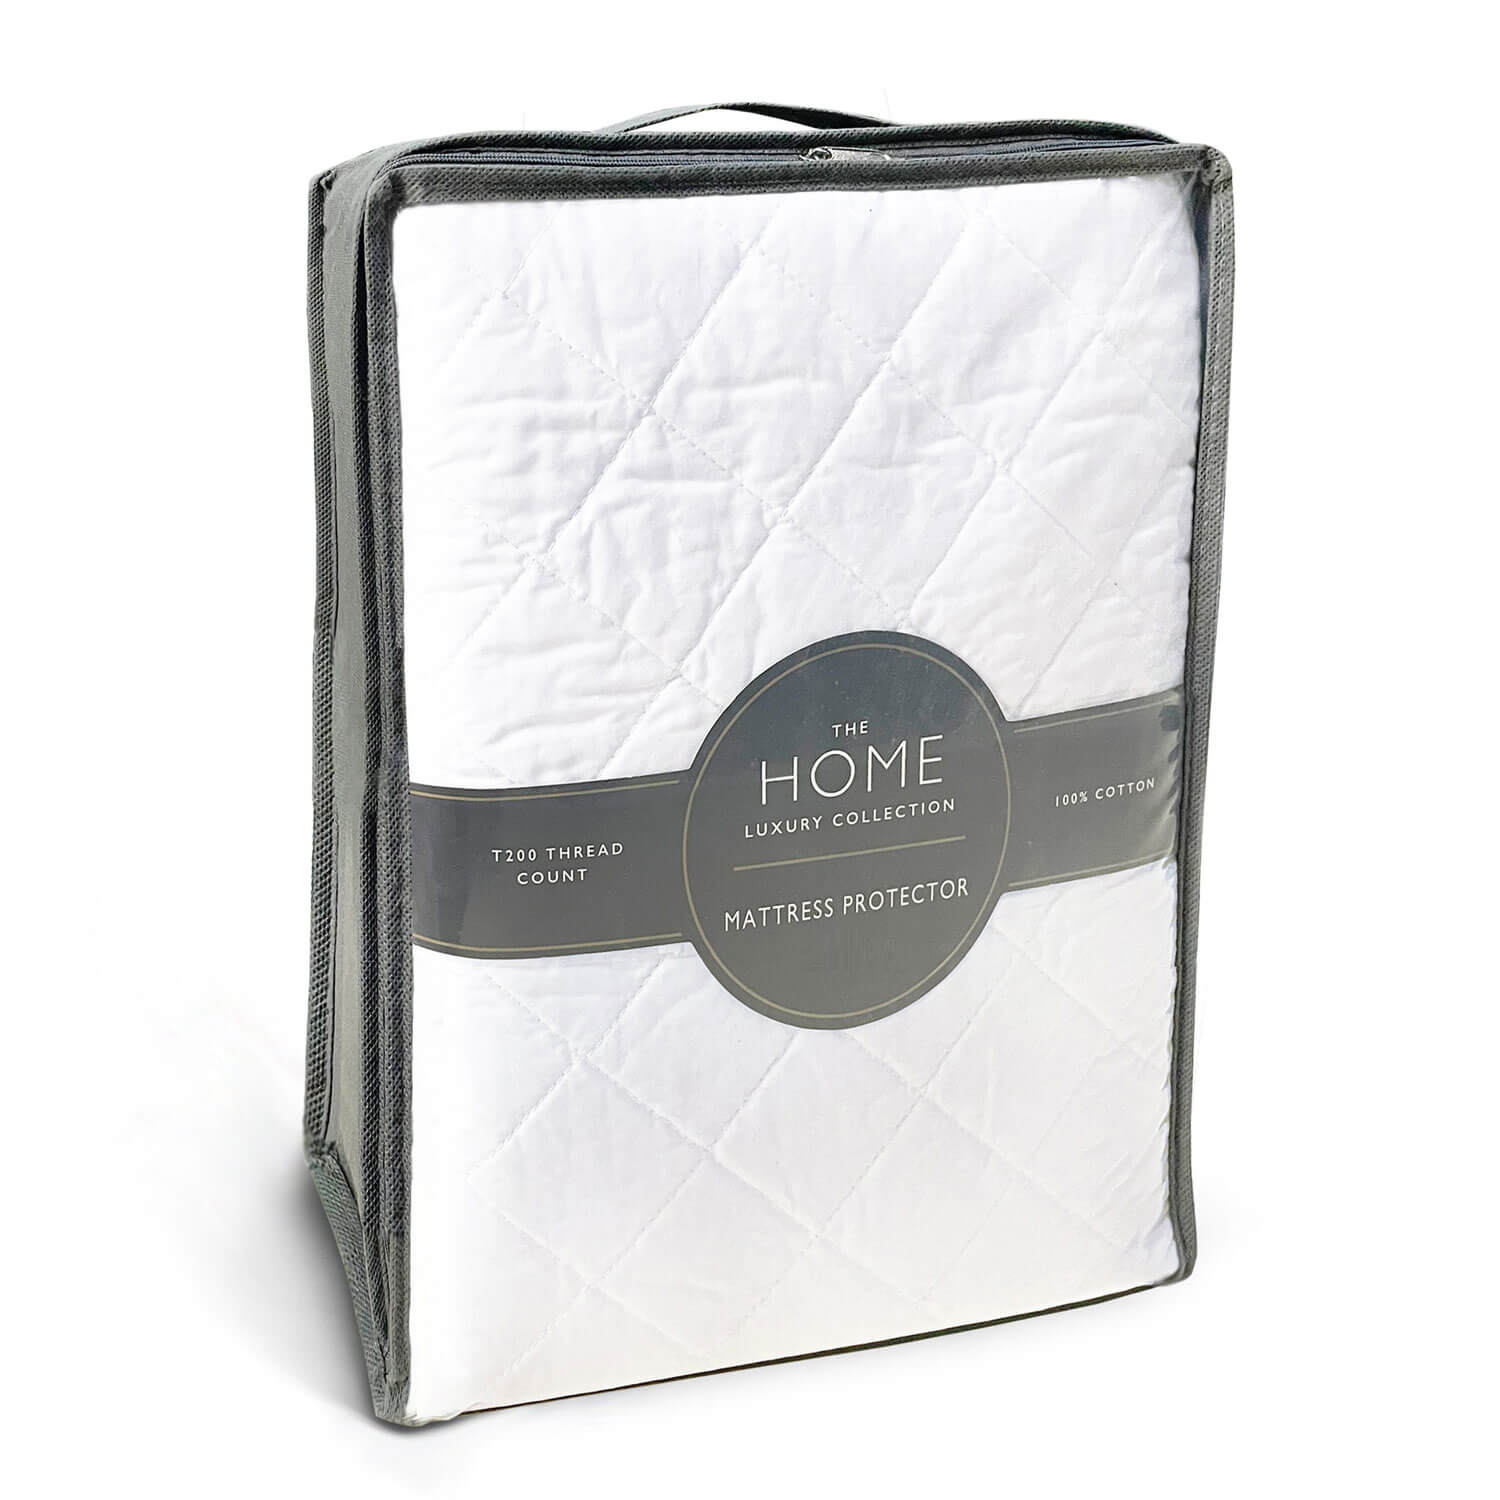 The Home Luxury Collection All Cotton Mattress Protector Single Bed - White 1 Shaws Department Stores